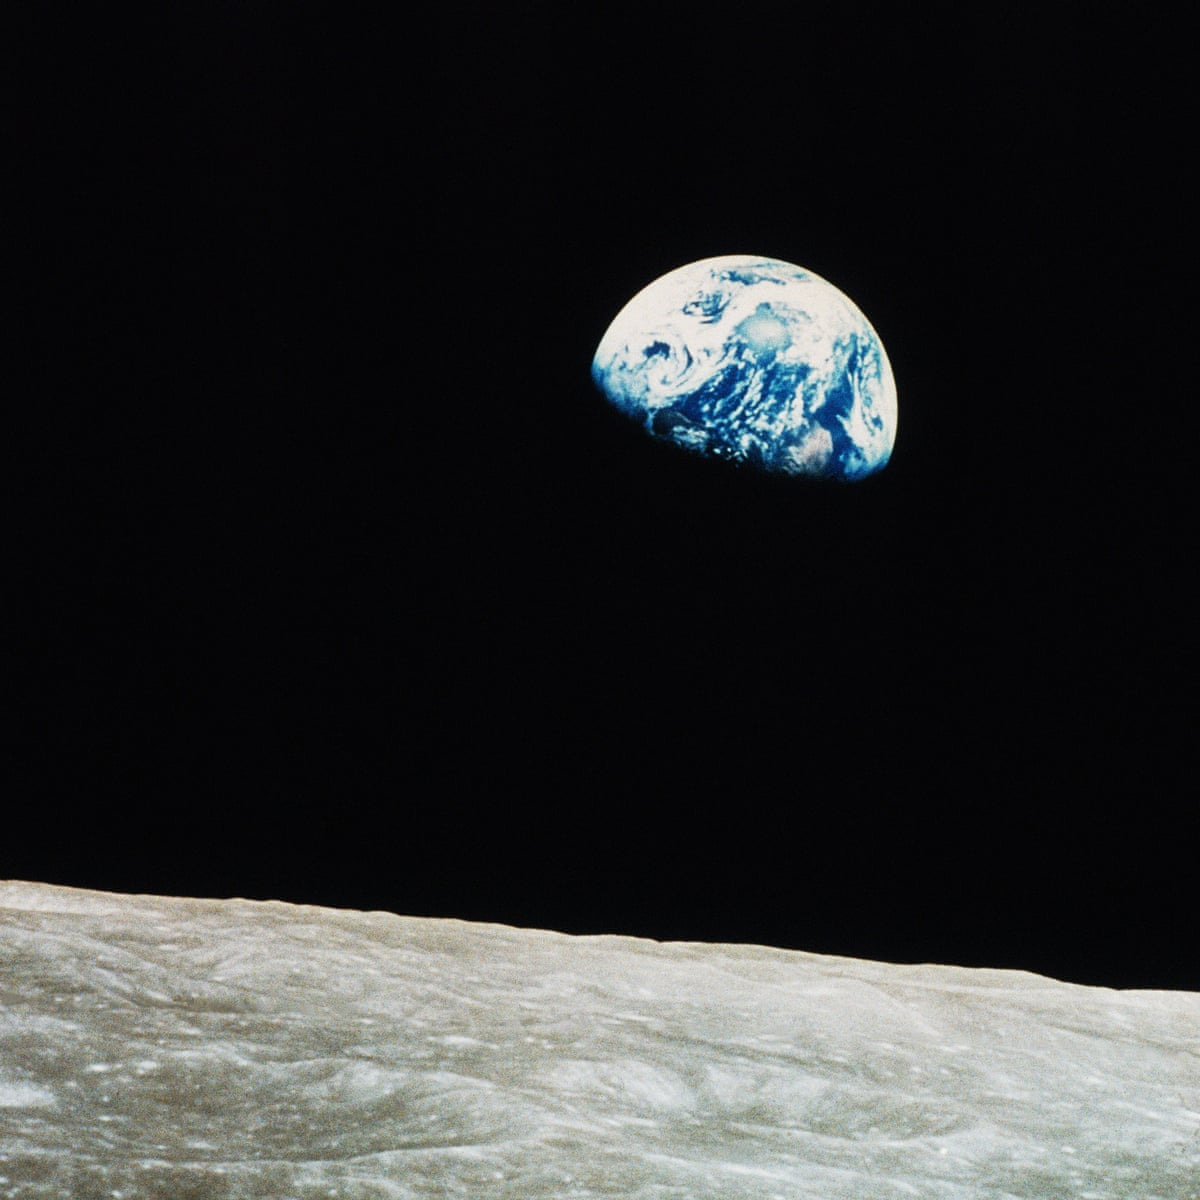 Earthrise: how the iconic image changed the world | Space | The Guardian